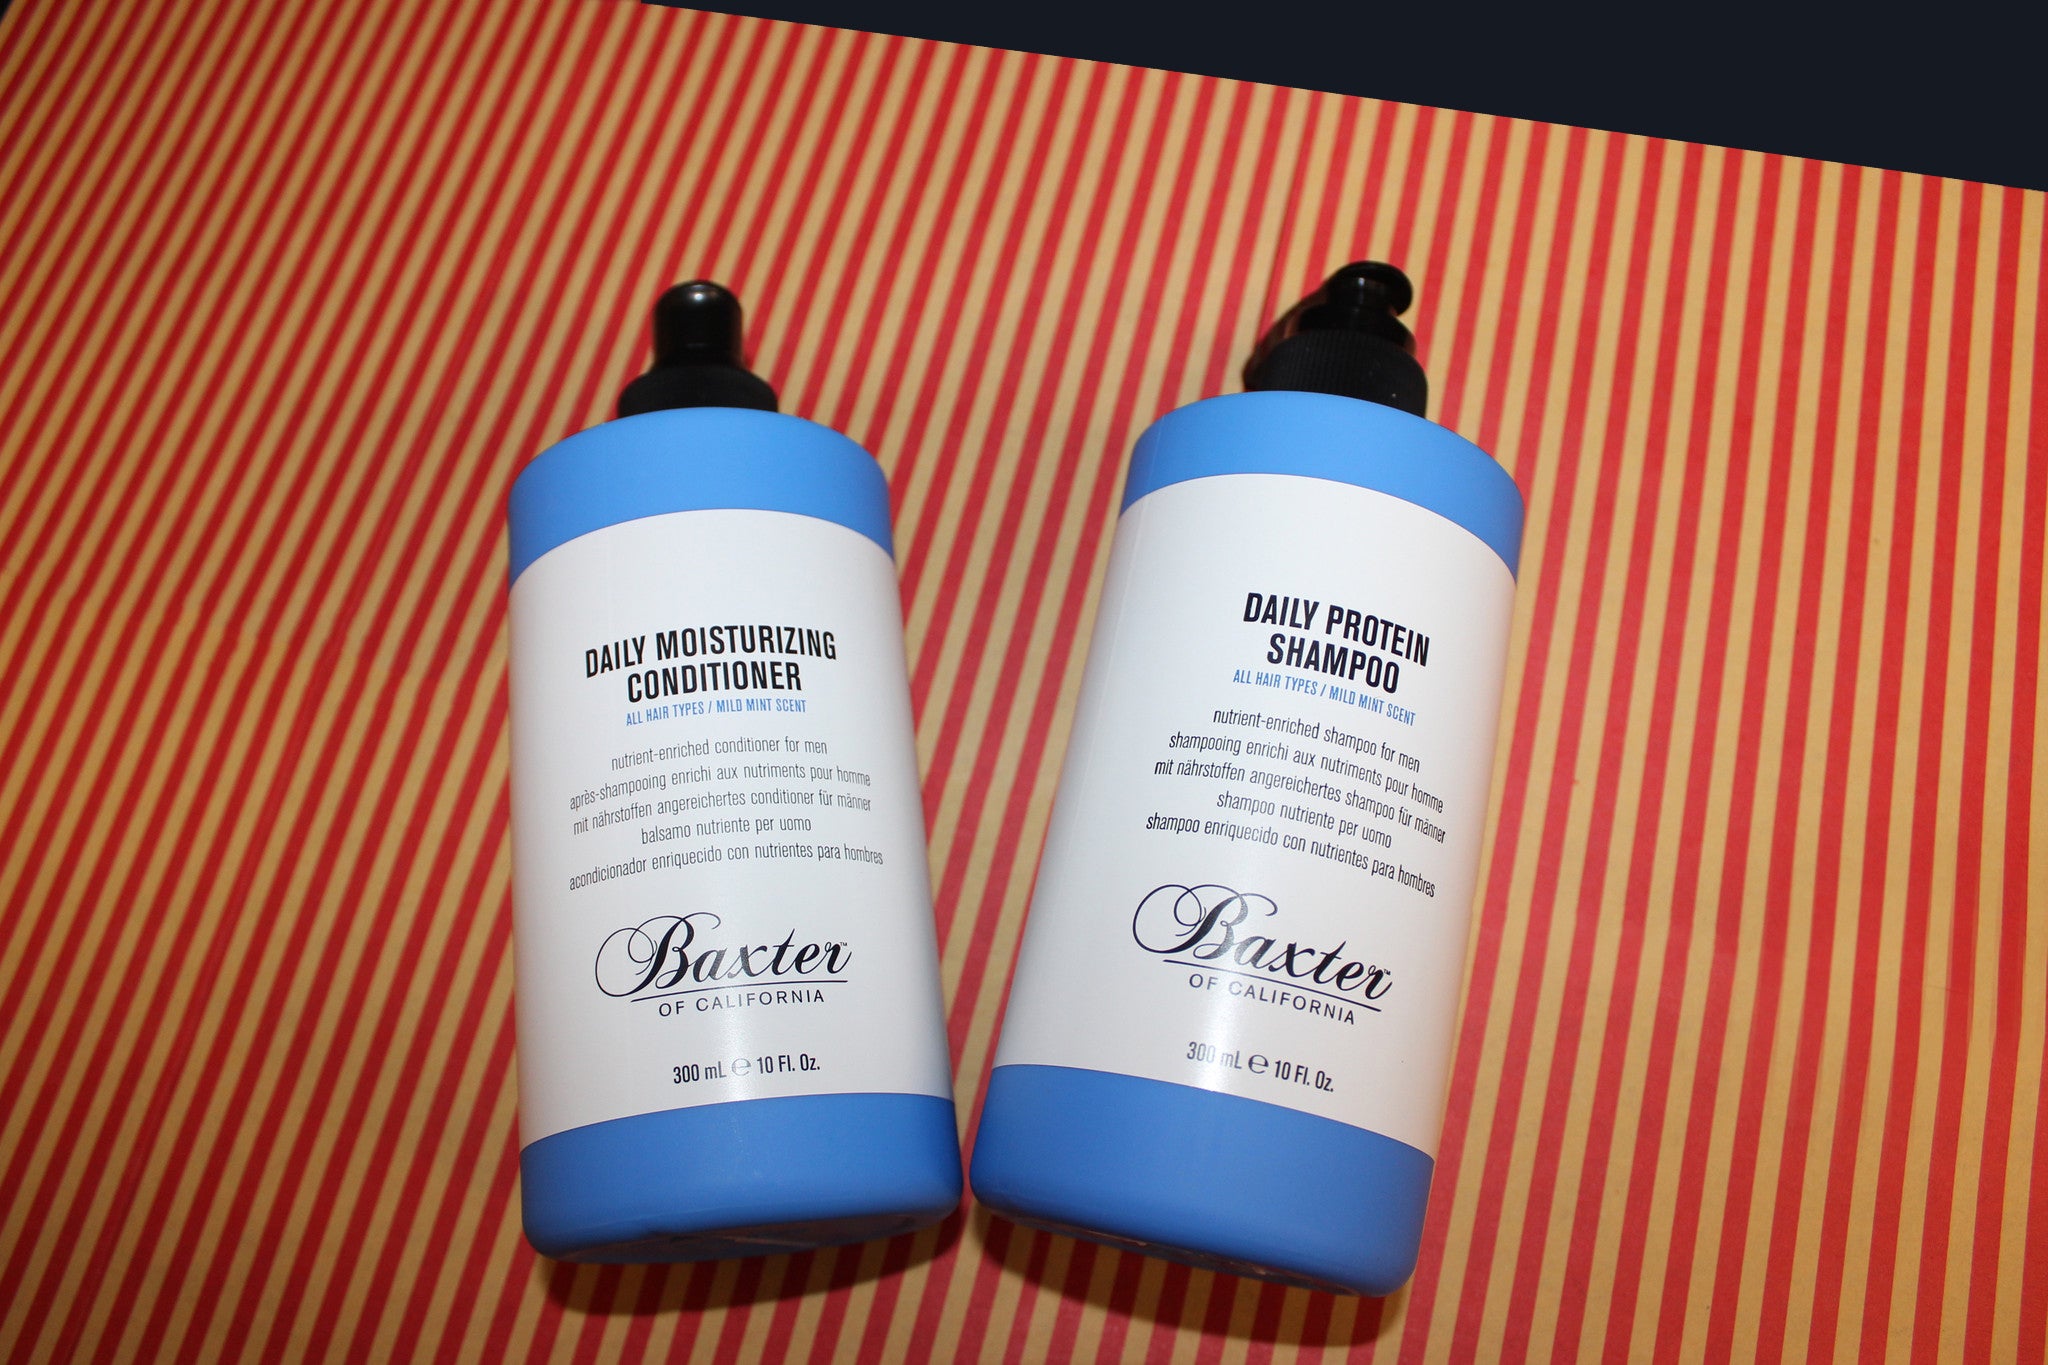 Baxter shampoo and conditioner